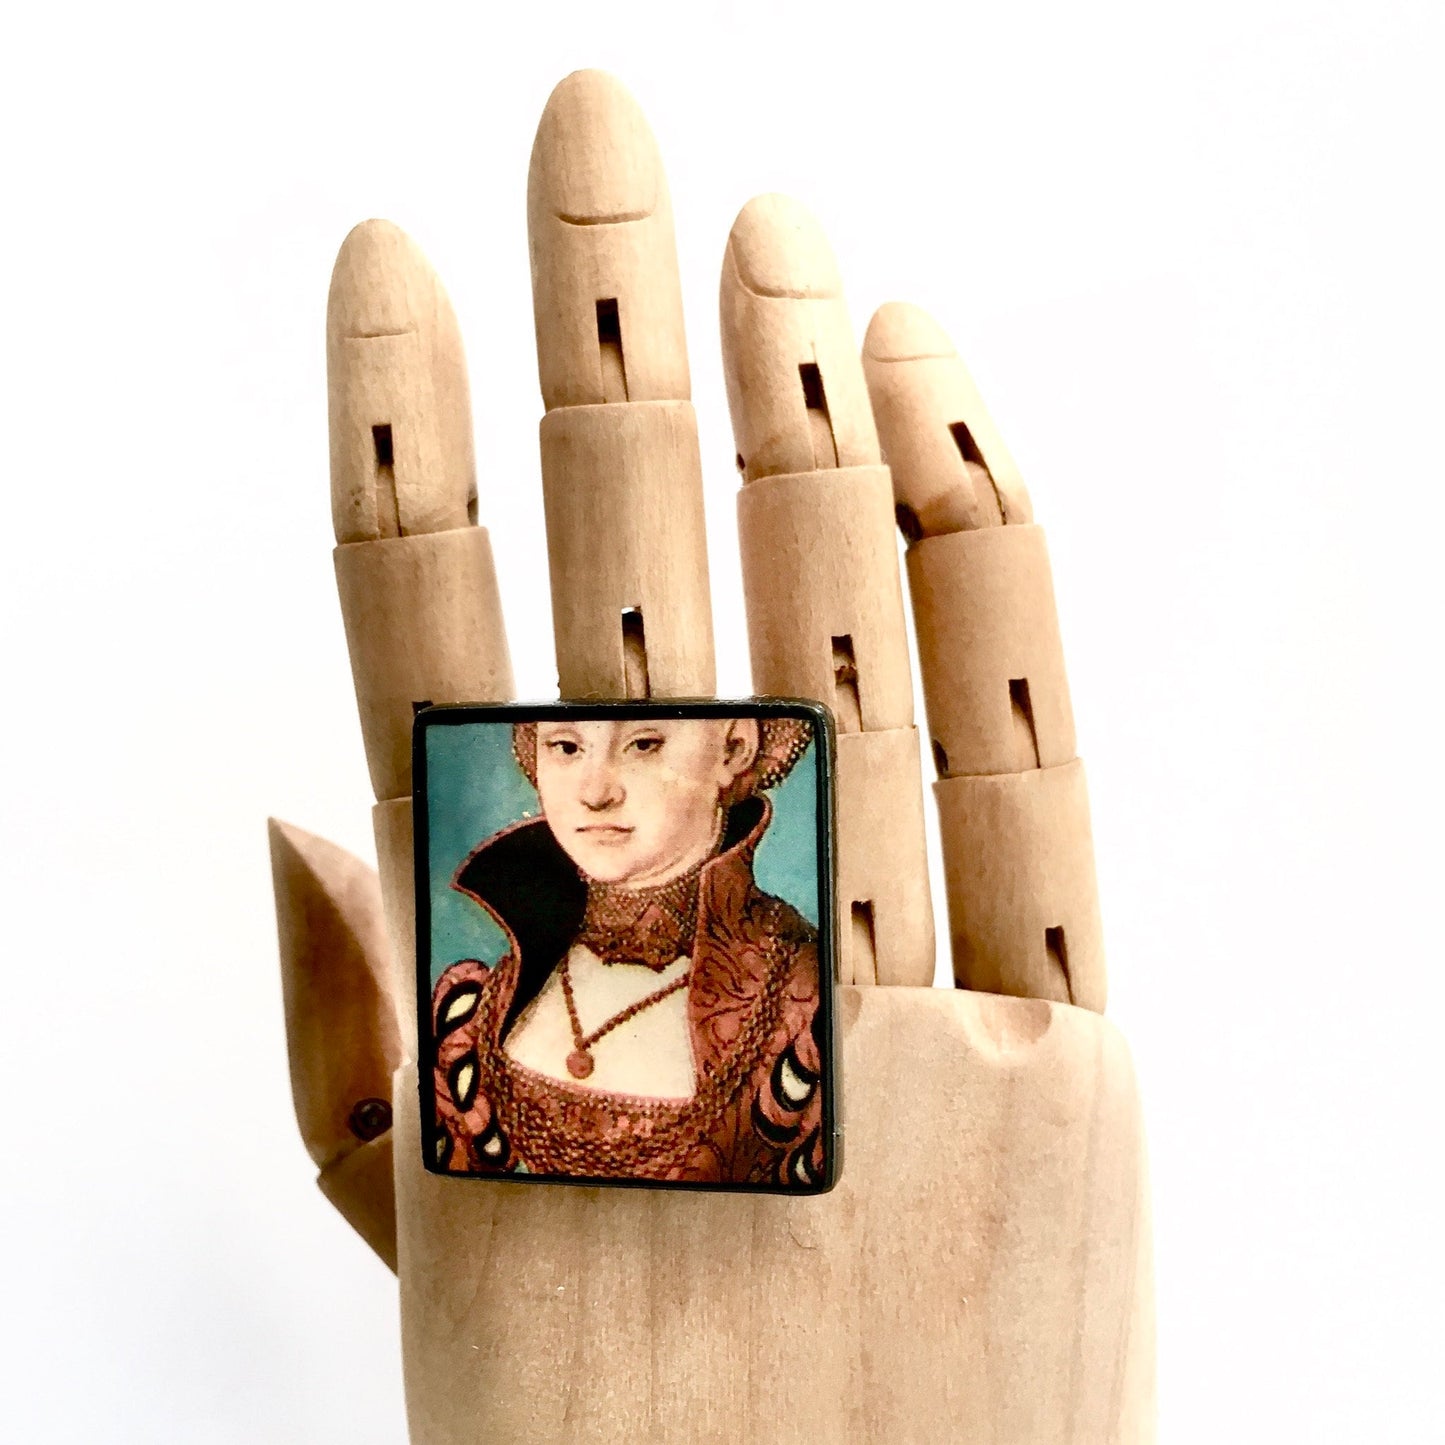 Adjustable, sustainable wooden ring for women,  inspired by German Renaissance artist Lucas Cranach.  Obljewellery Lady portrait ring.